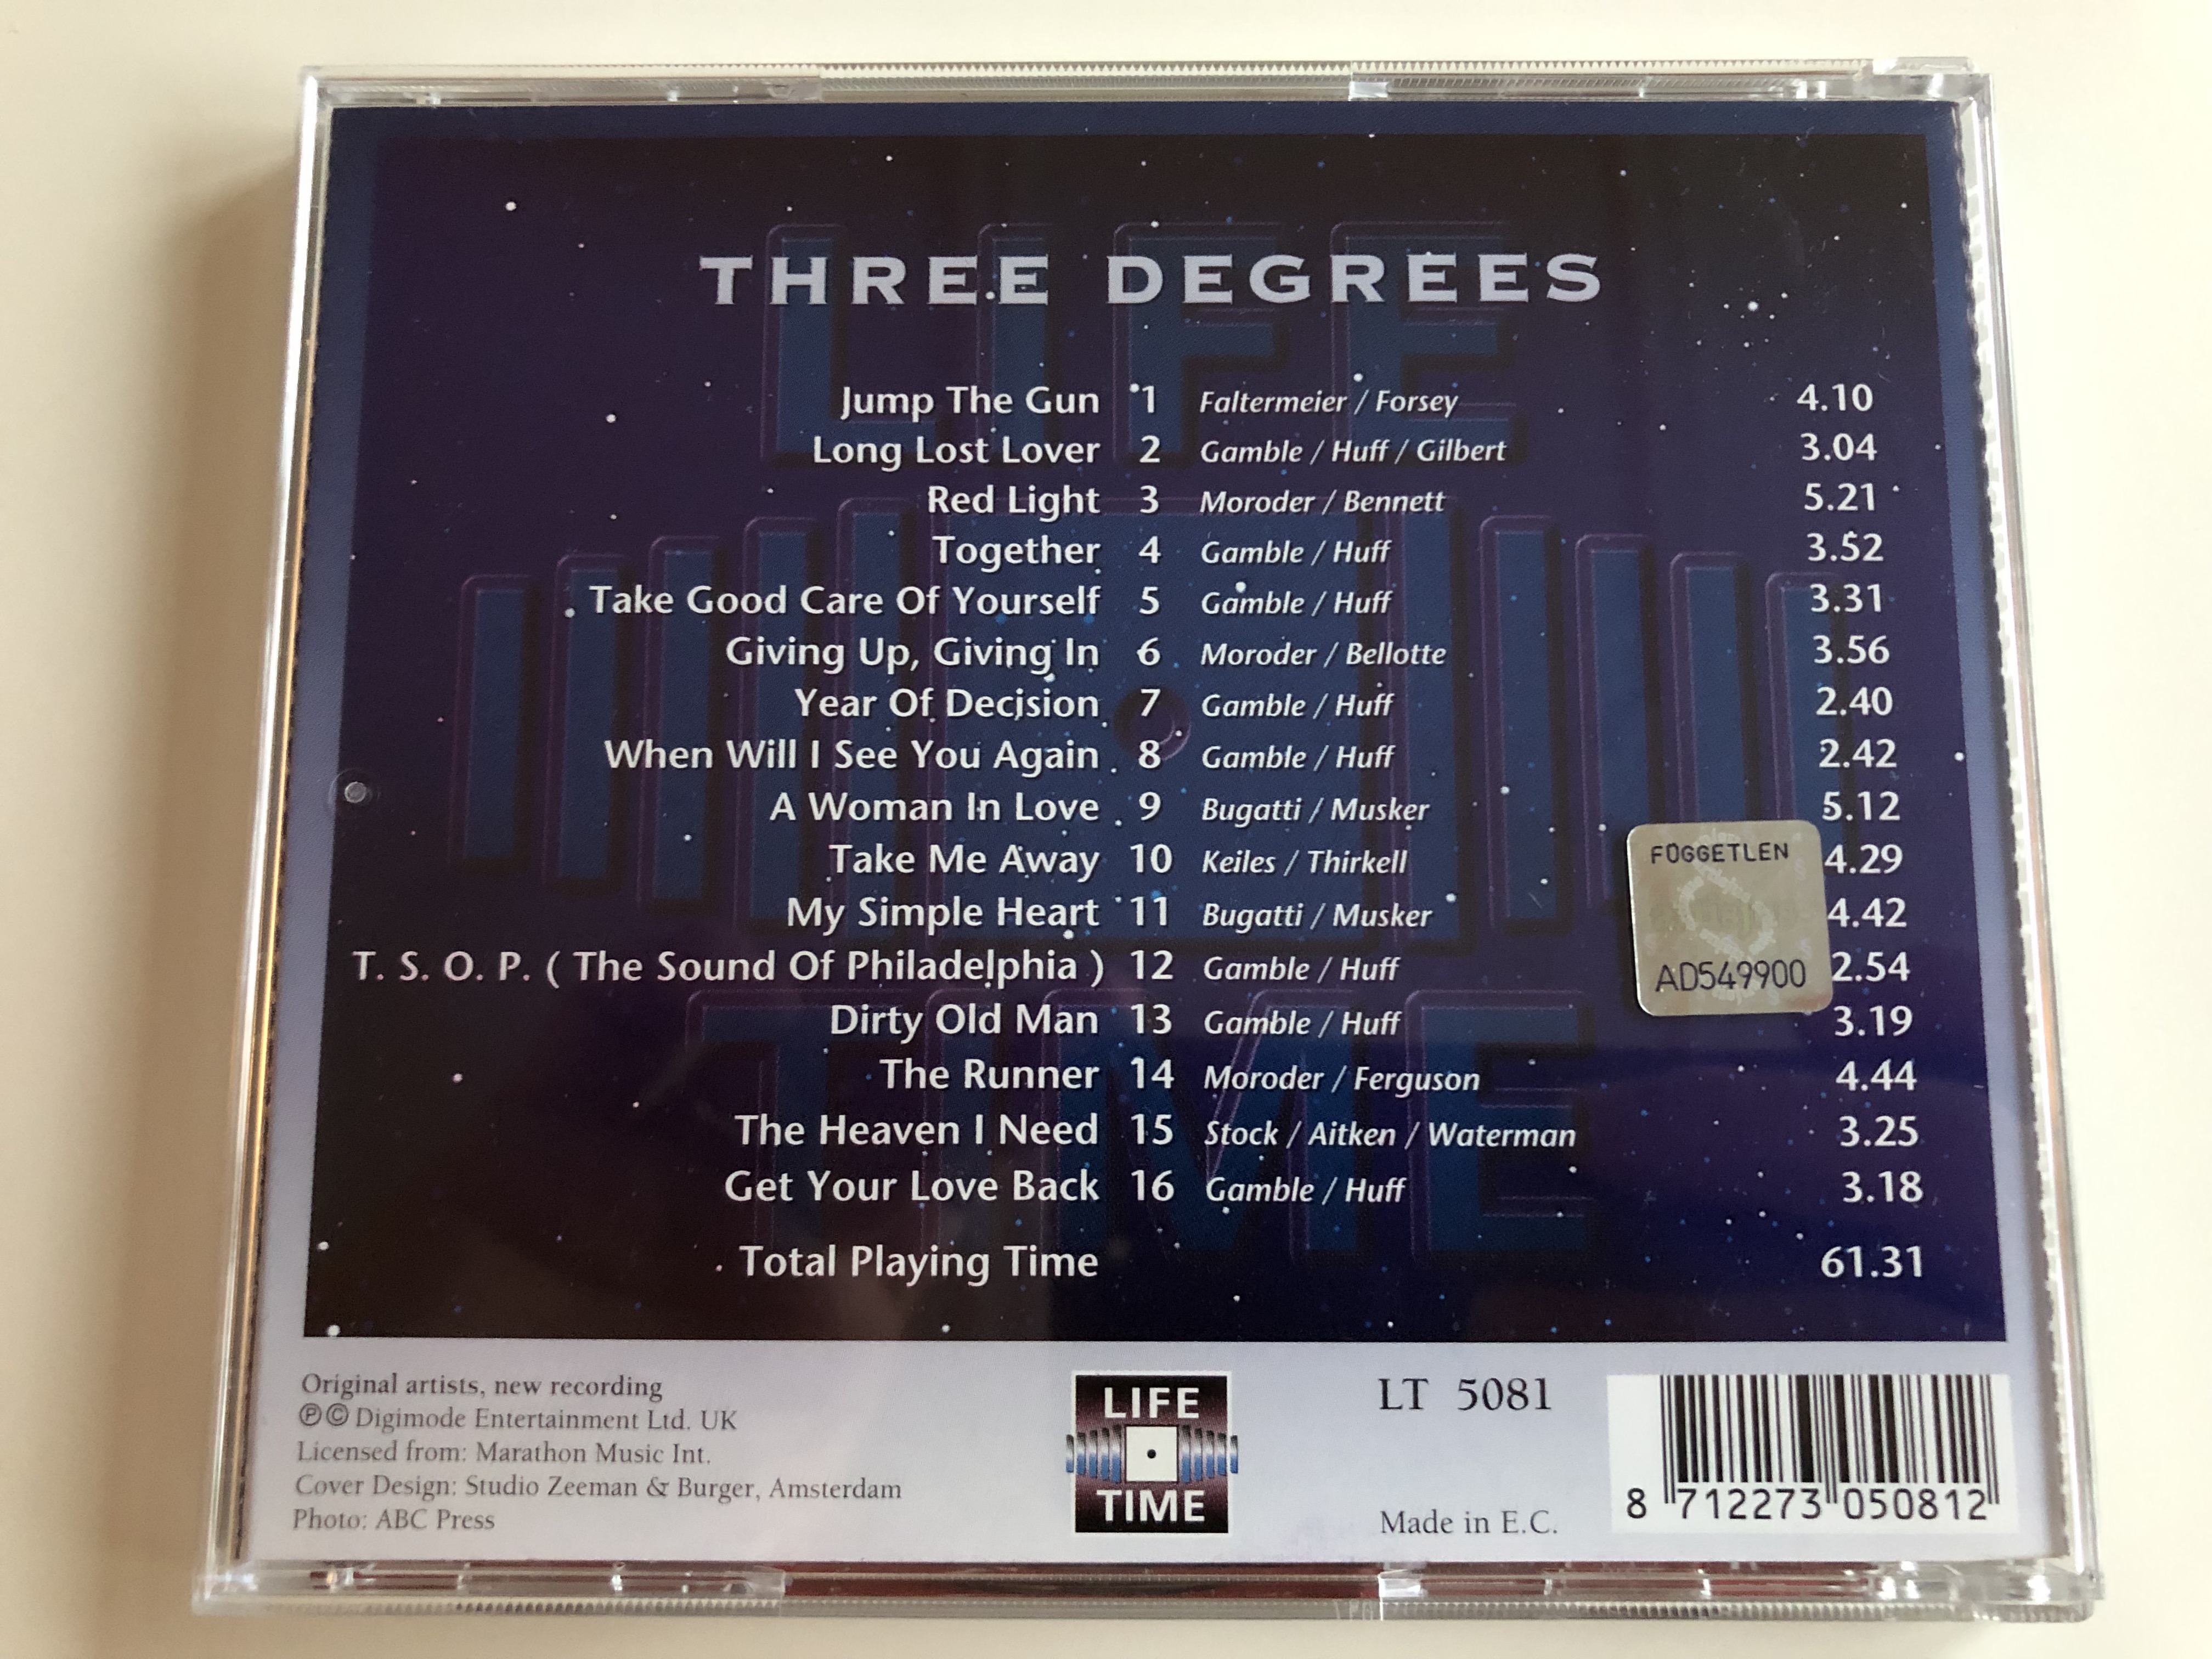 three-degrees-dirty-old-man-when-will-i-see-you-again-take-good-care-of-yourself-t.-s.-o.-p.-the-sound-of-philadelphia-life-time-audio-cd-lt-5081-3-.jpg